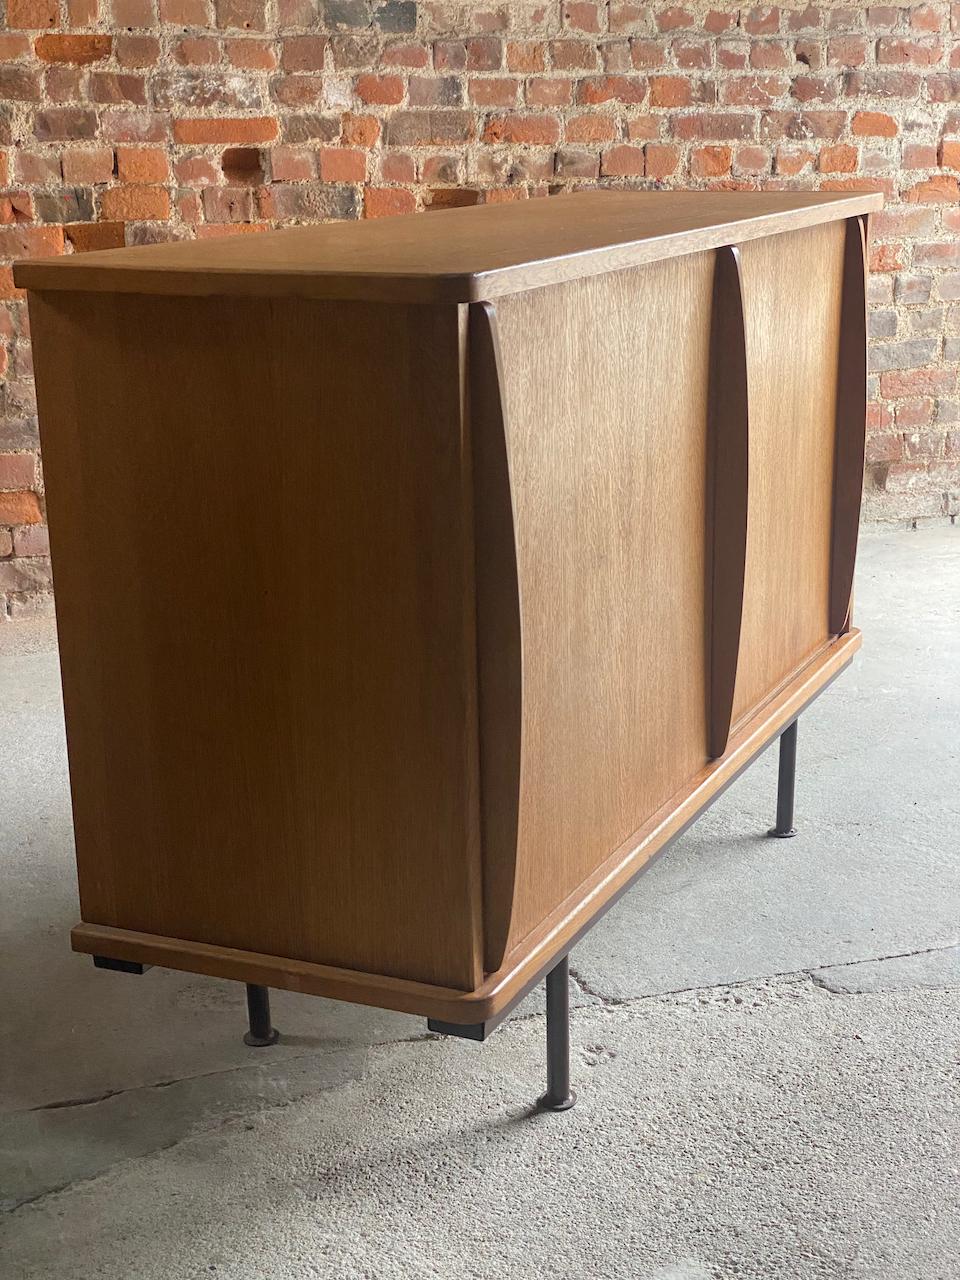 Jean Prouve Oak Sideboard Cabinet by Ateliers France circa 1940 In Good Condition In Longdon, Tewkesbury